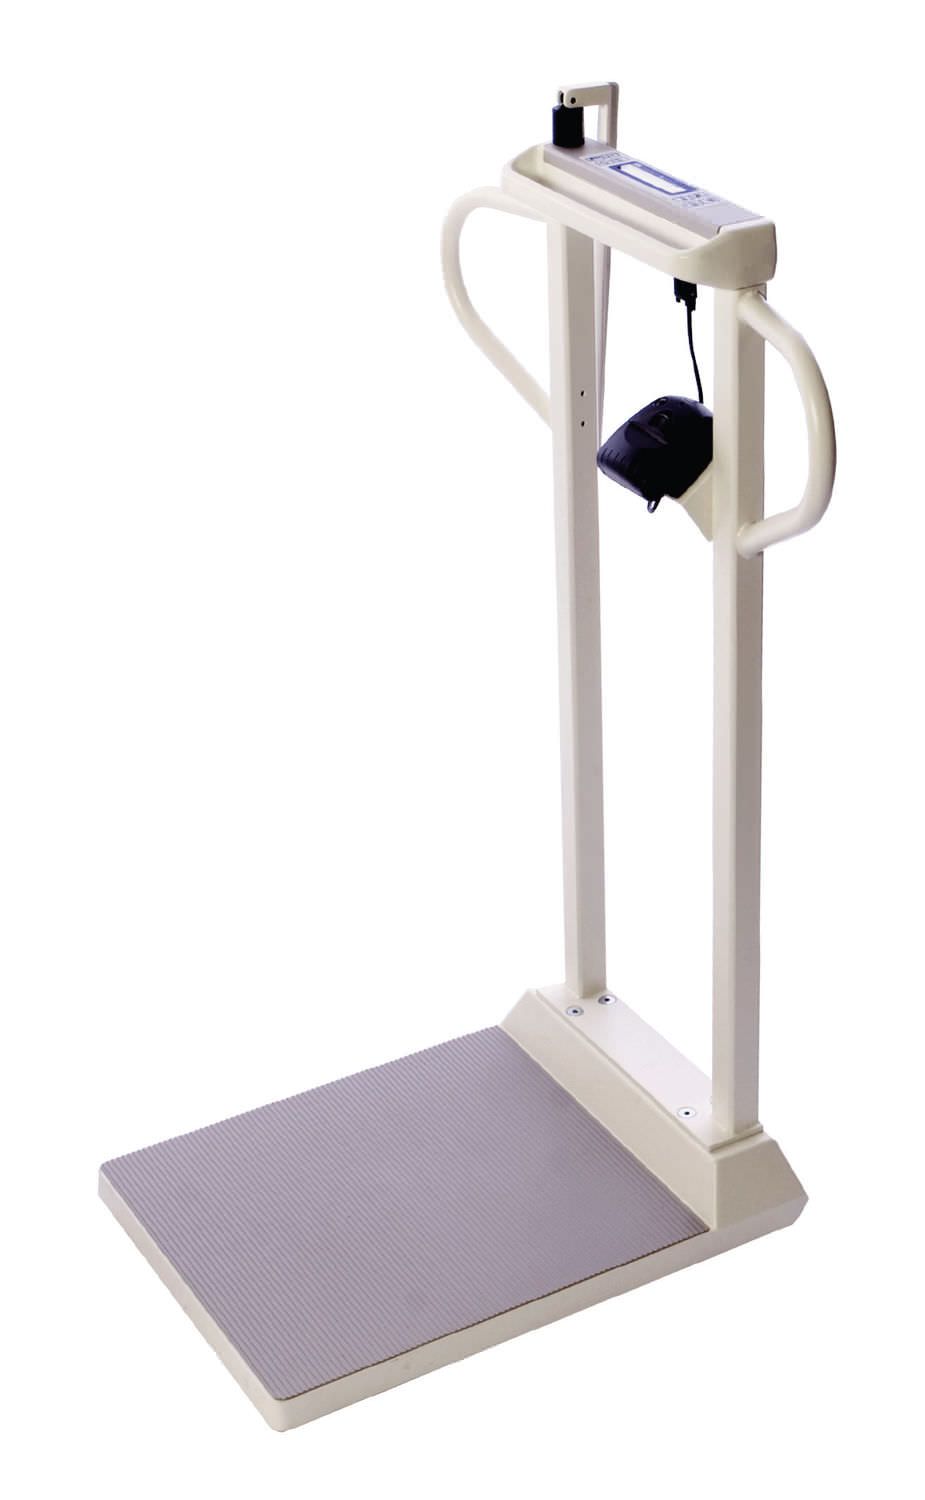 Bariatric patient weighing scale / electronic / column type / with height rod 454 Kg - 109-199 cm | SR565I SR Instruments